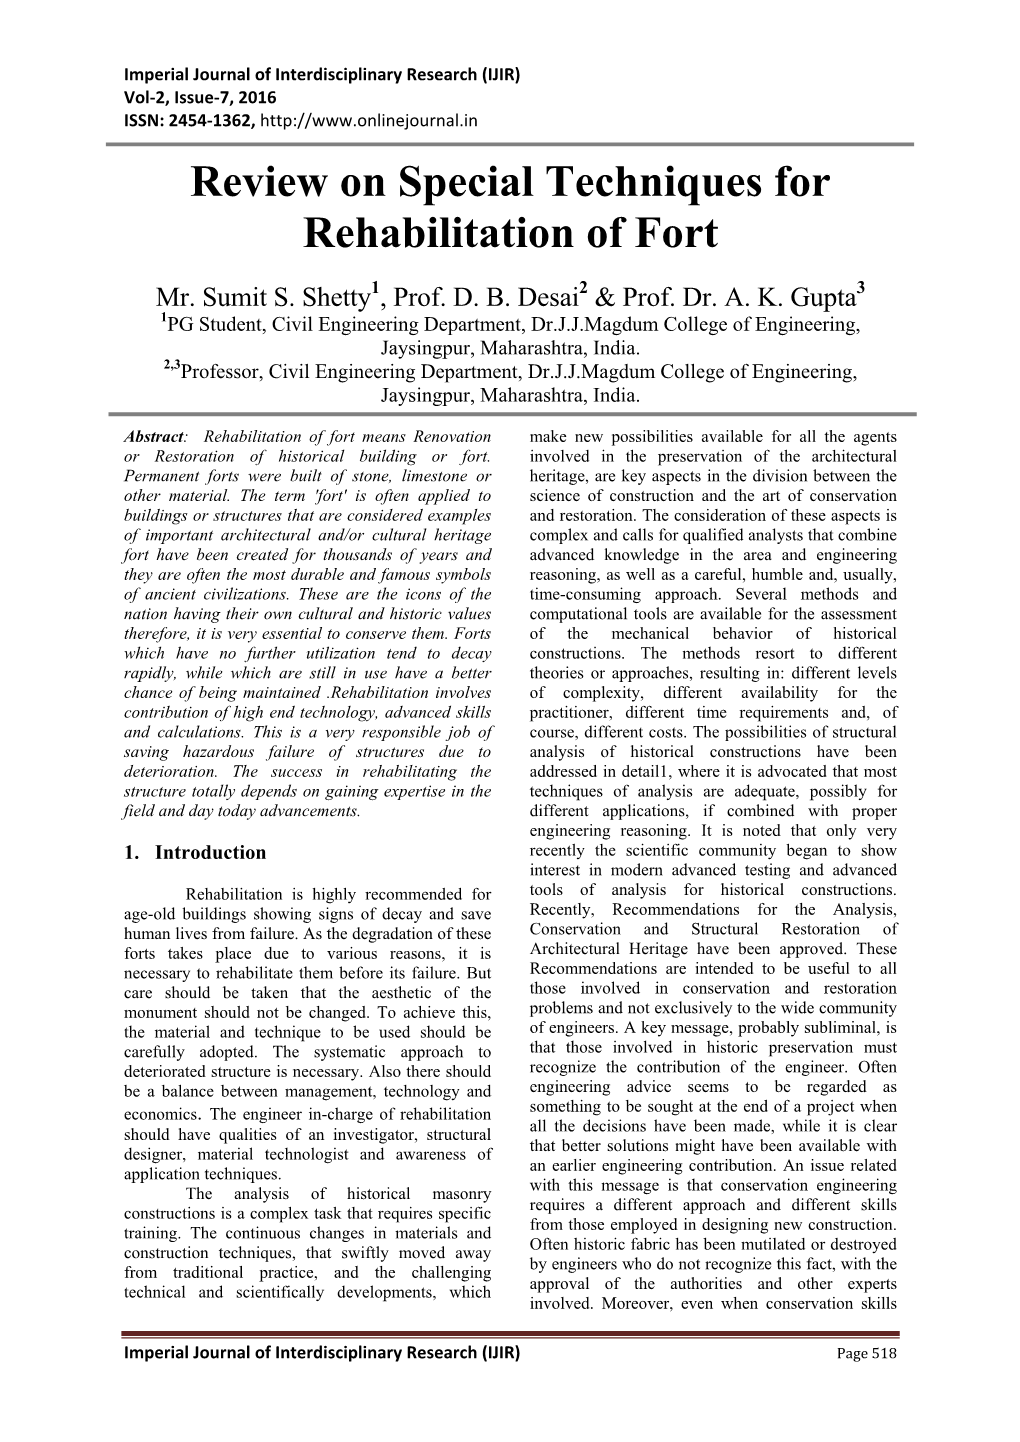 Review on Special Techniques for Rehabilitation of Fort